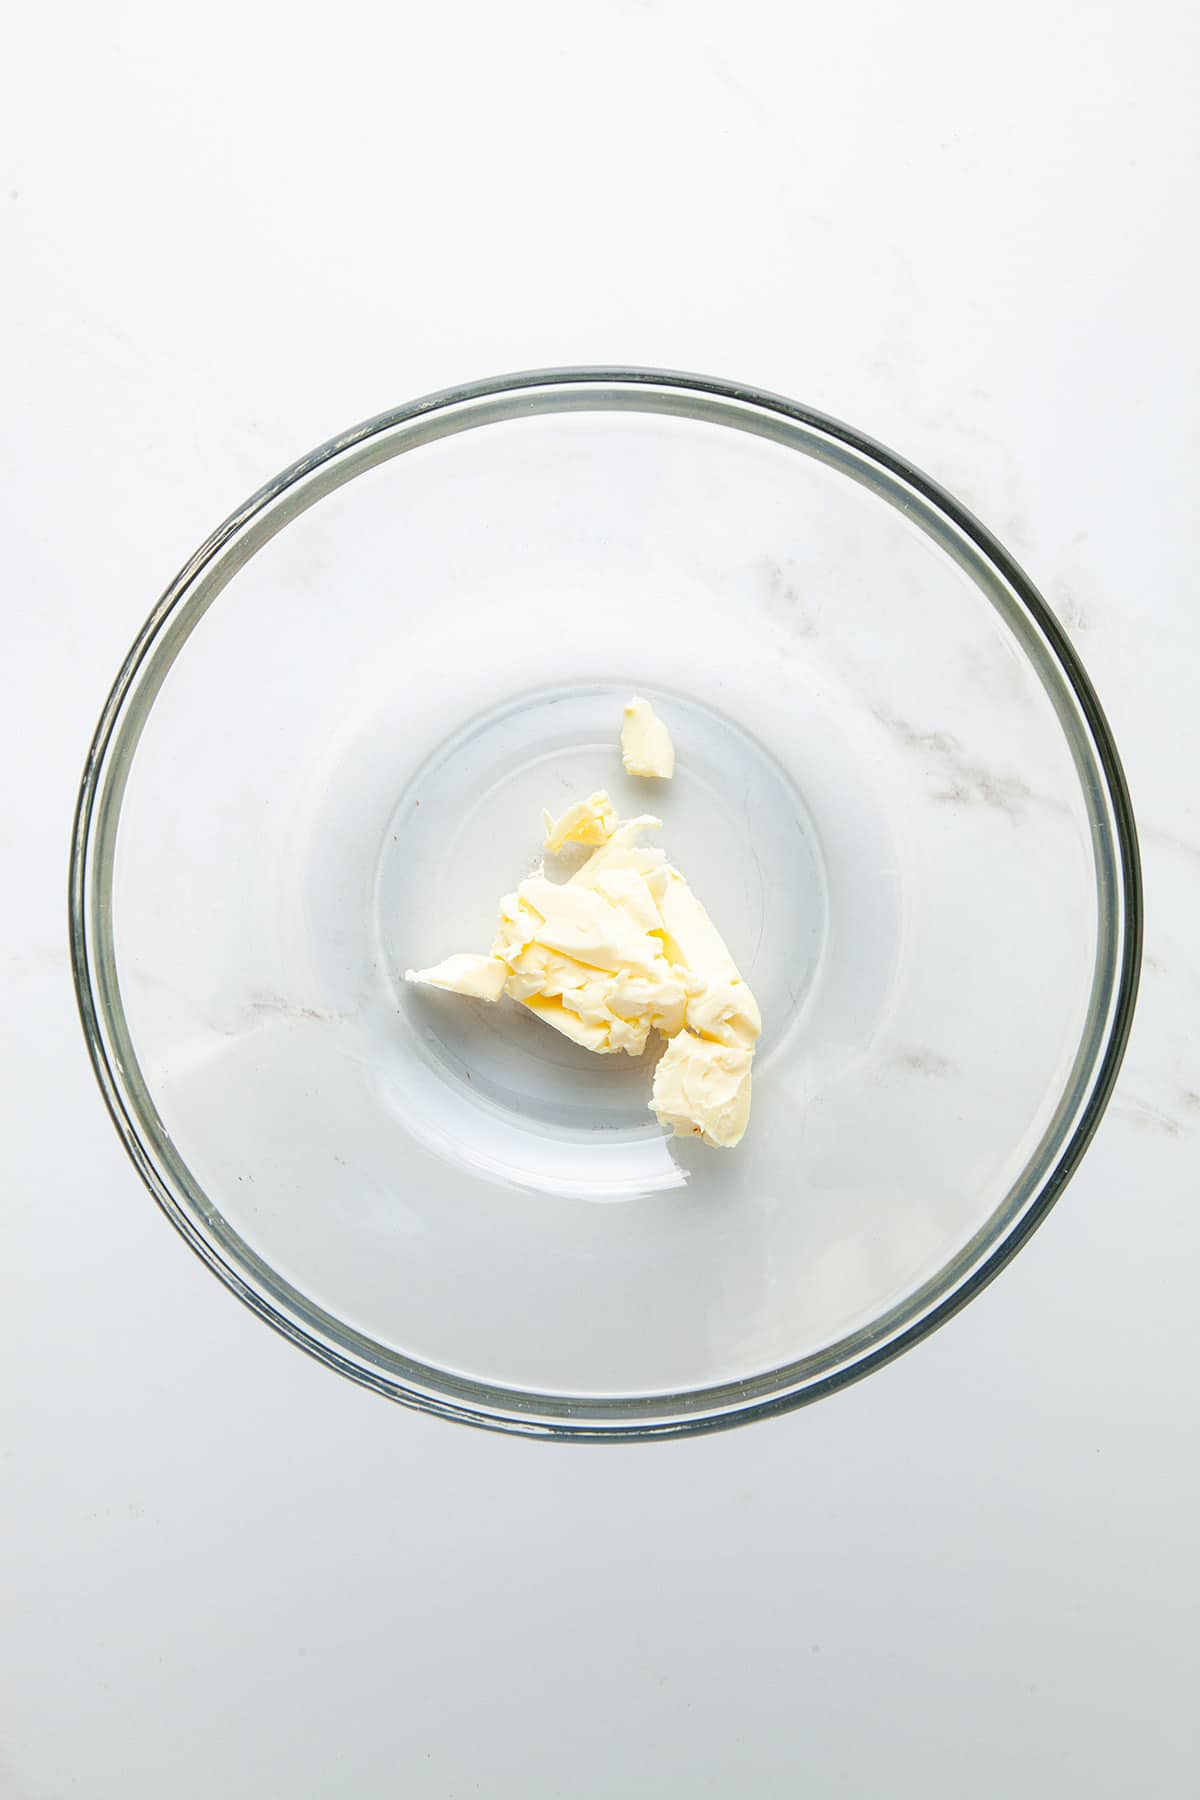 A glass bowl with a large chunk of butter.